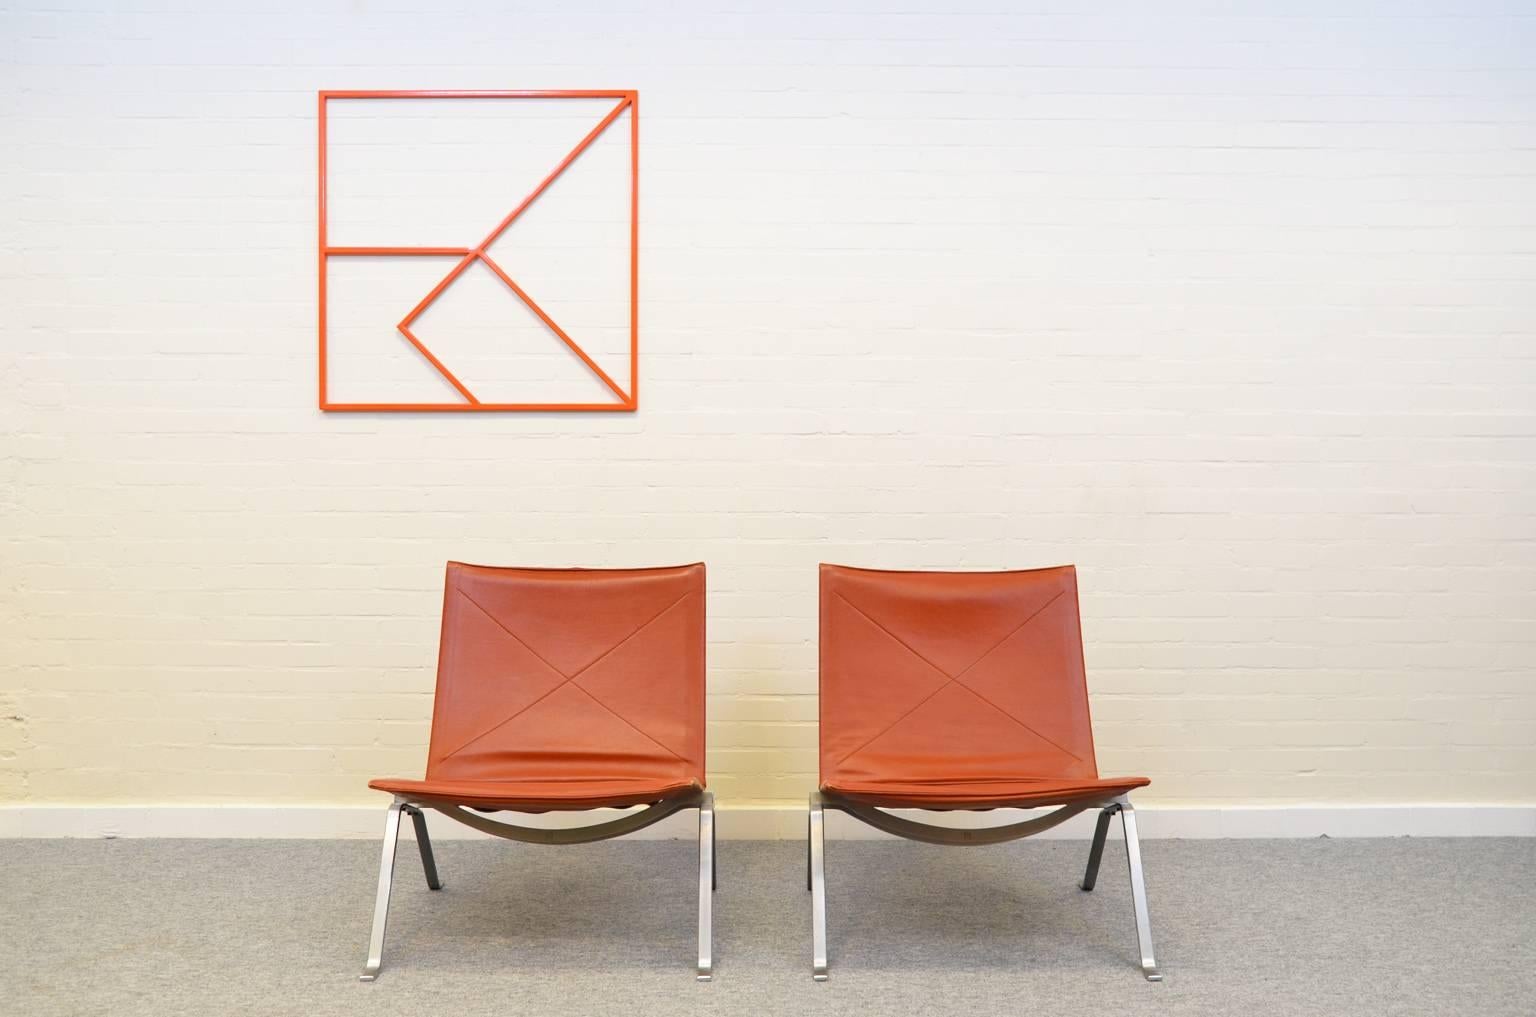 E. Kold Christensen logo in orange-colored metal designed by Poul Kjaerholm in 1956. Made of lacquered steel and in an excellent and original condition.